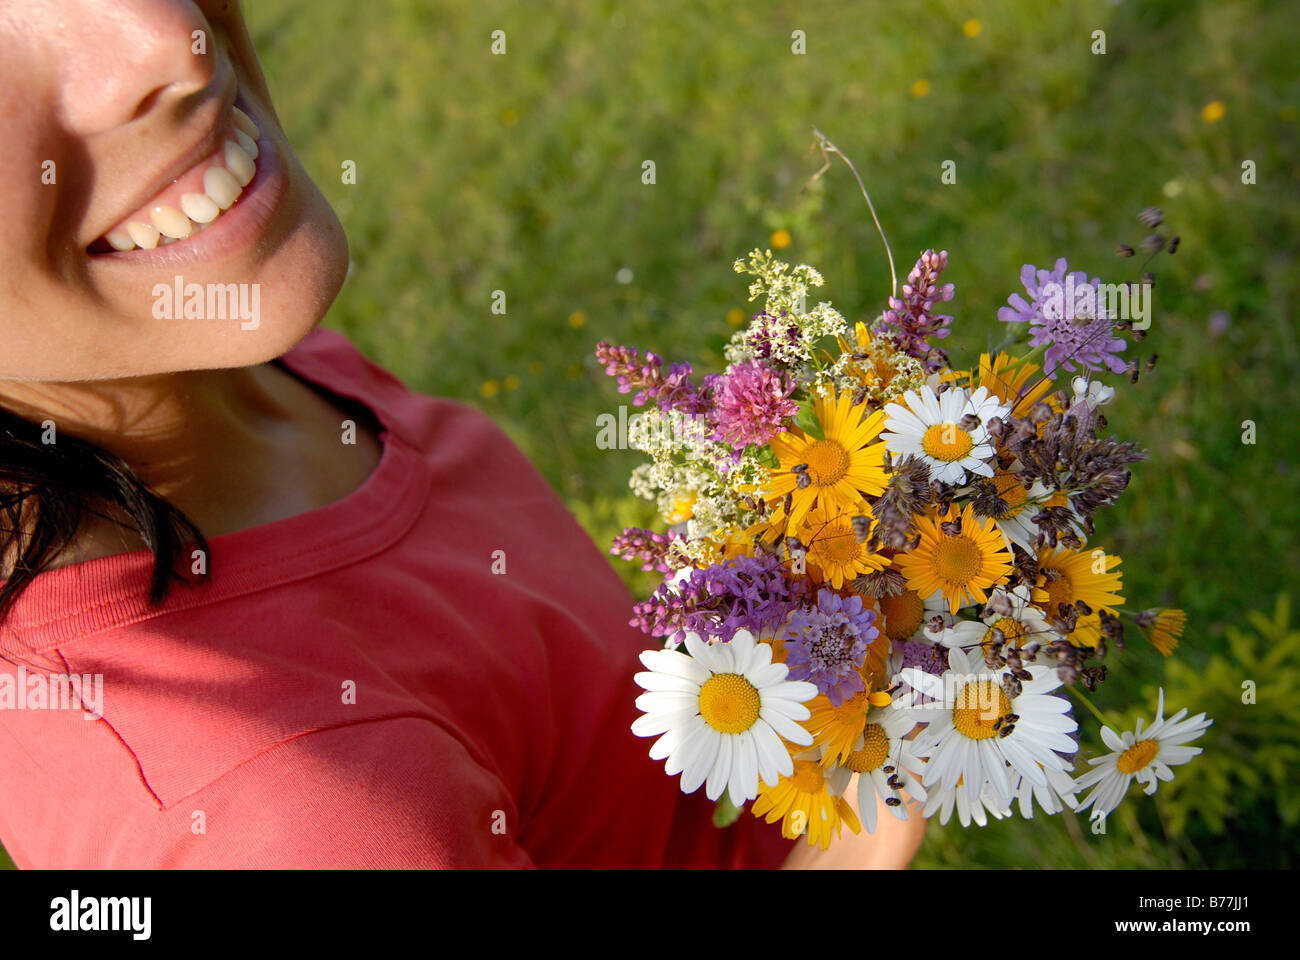 Smiling young woman holding a bunch of flowers, Tyrol, Austria, Europe Stock Photo